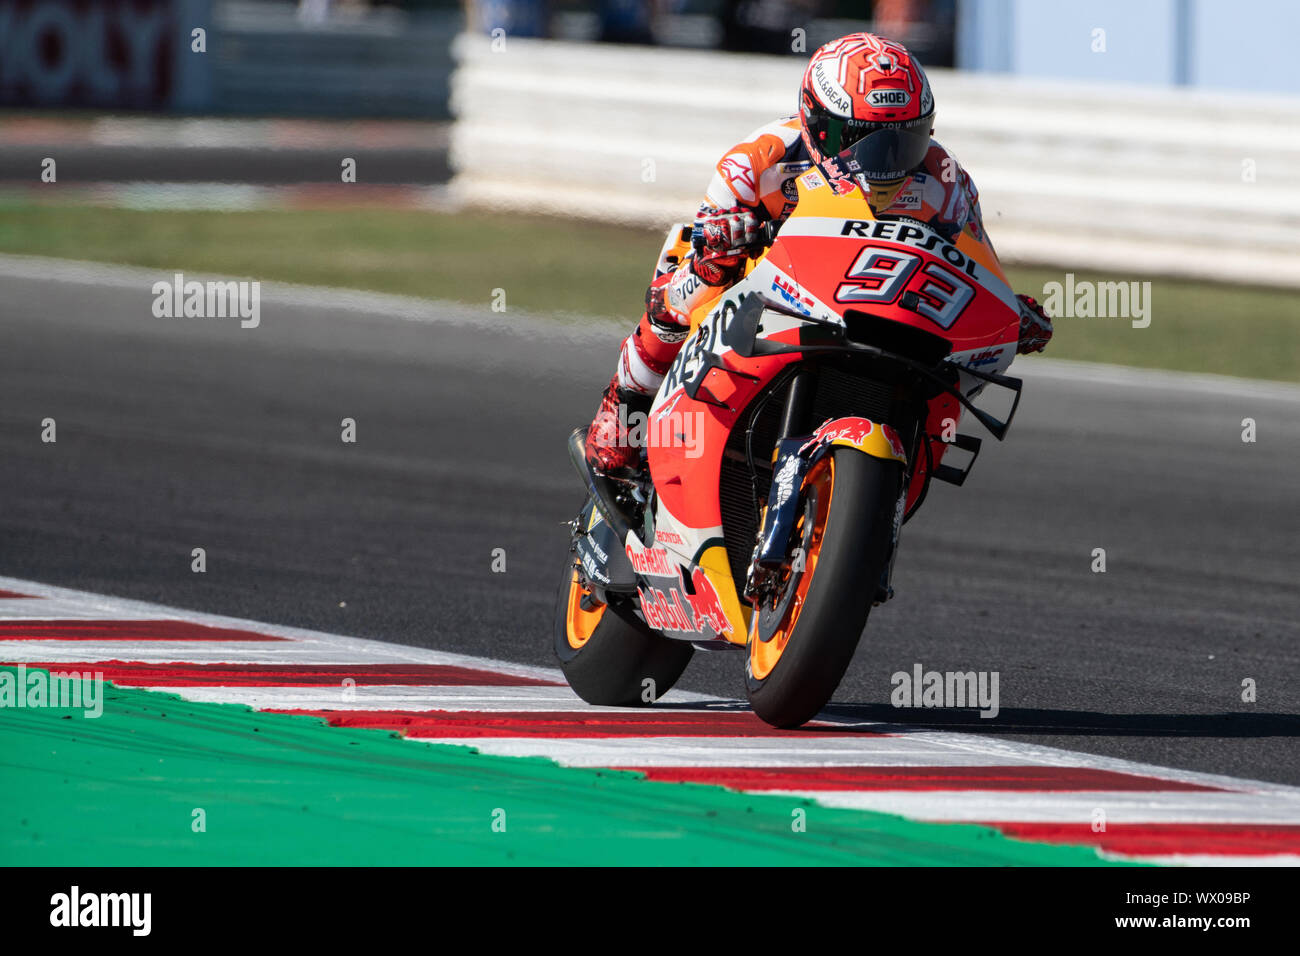 MARC MARQUEZ, SPANISH RIDER AND MOTOGP WORLD CHAMPION WITH NUMBER 93 FOR REPSOL HONDA TEAM  during Friday Free Practice (fp1-fp2) Of The Motogp Of San Stock Photo